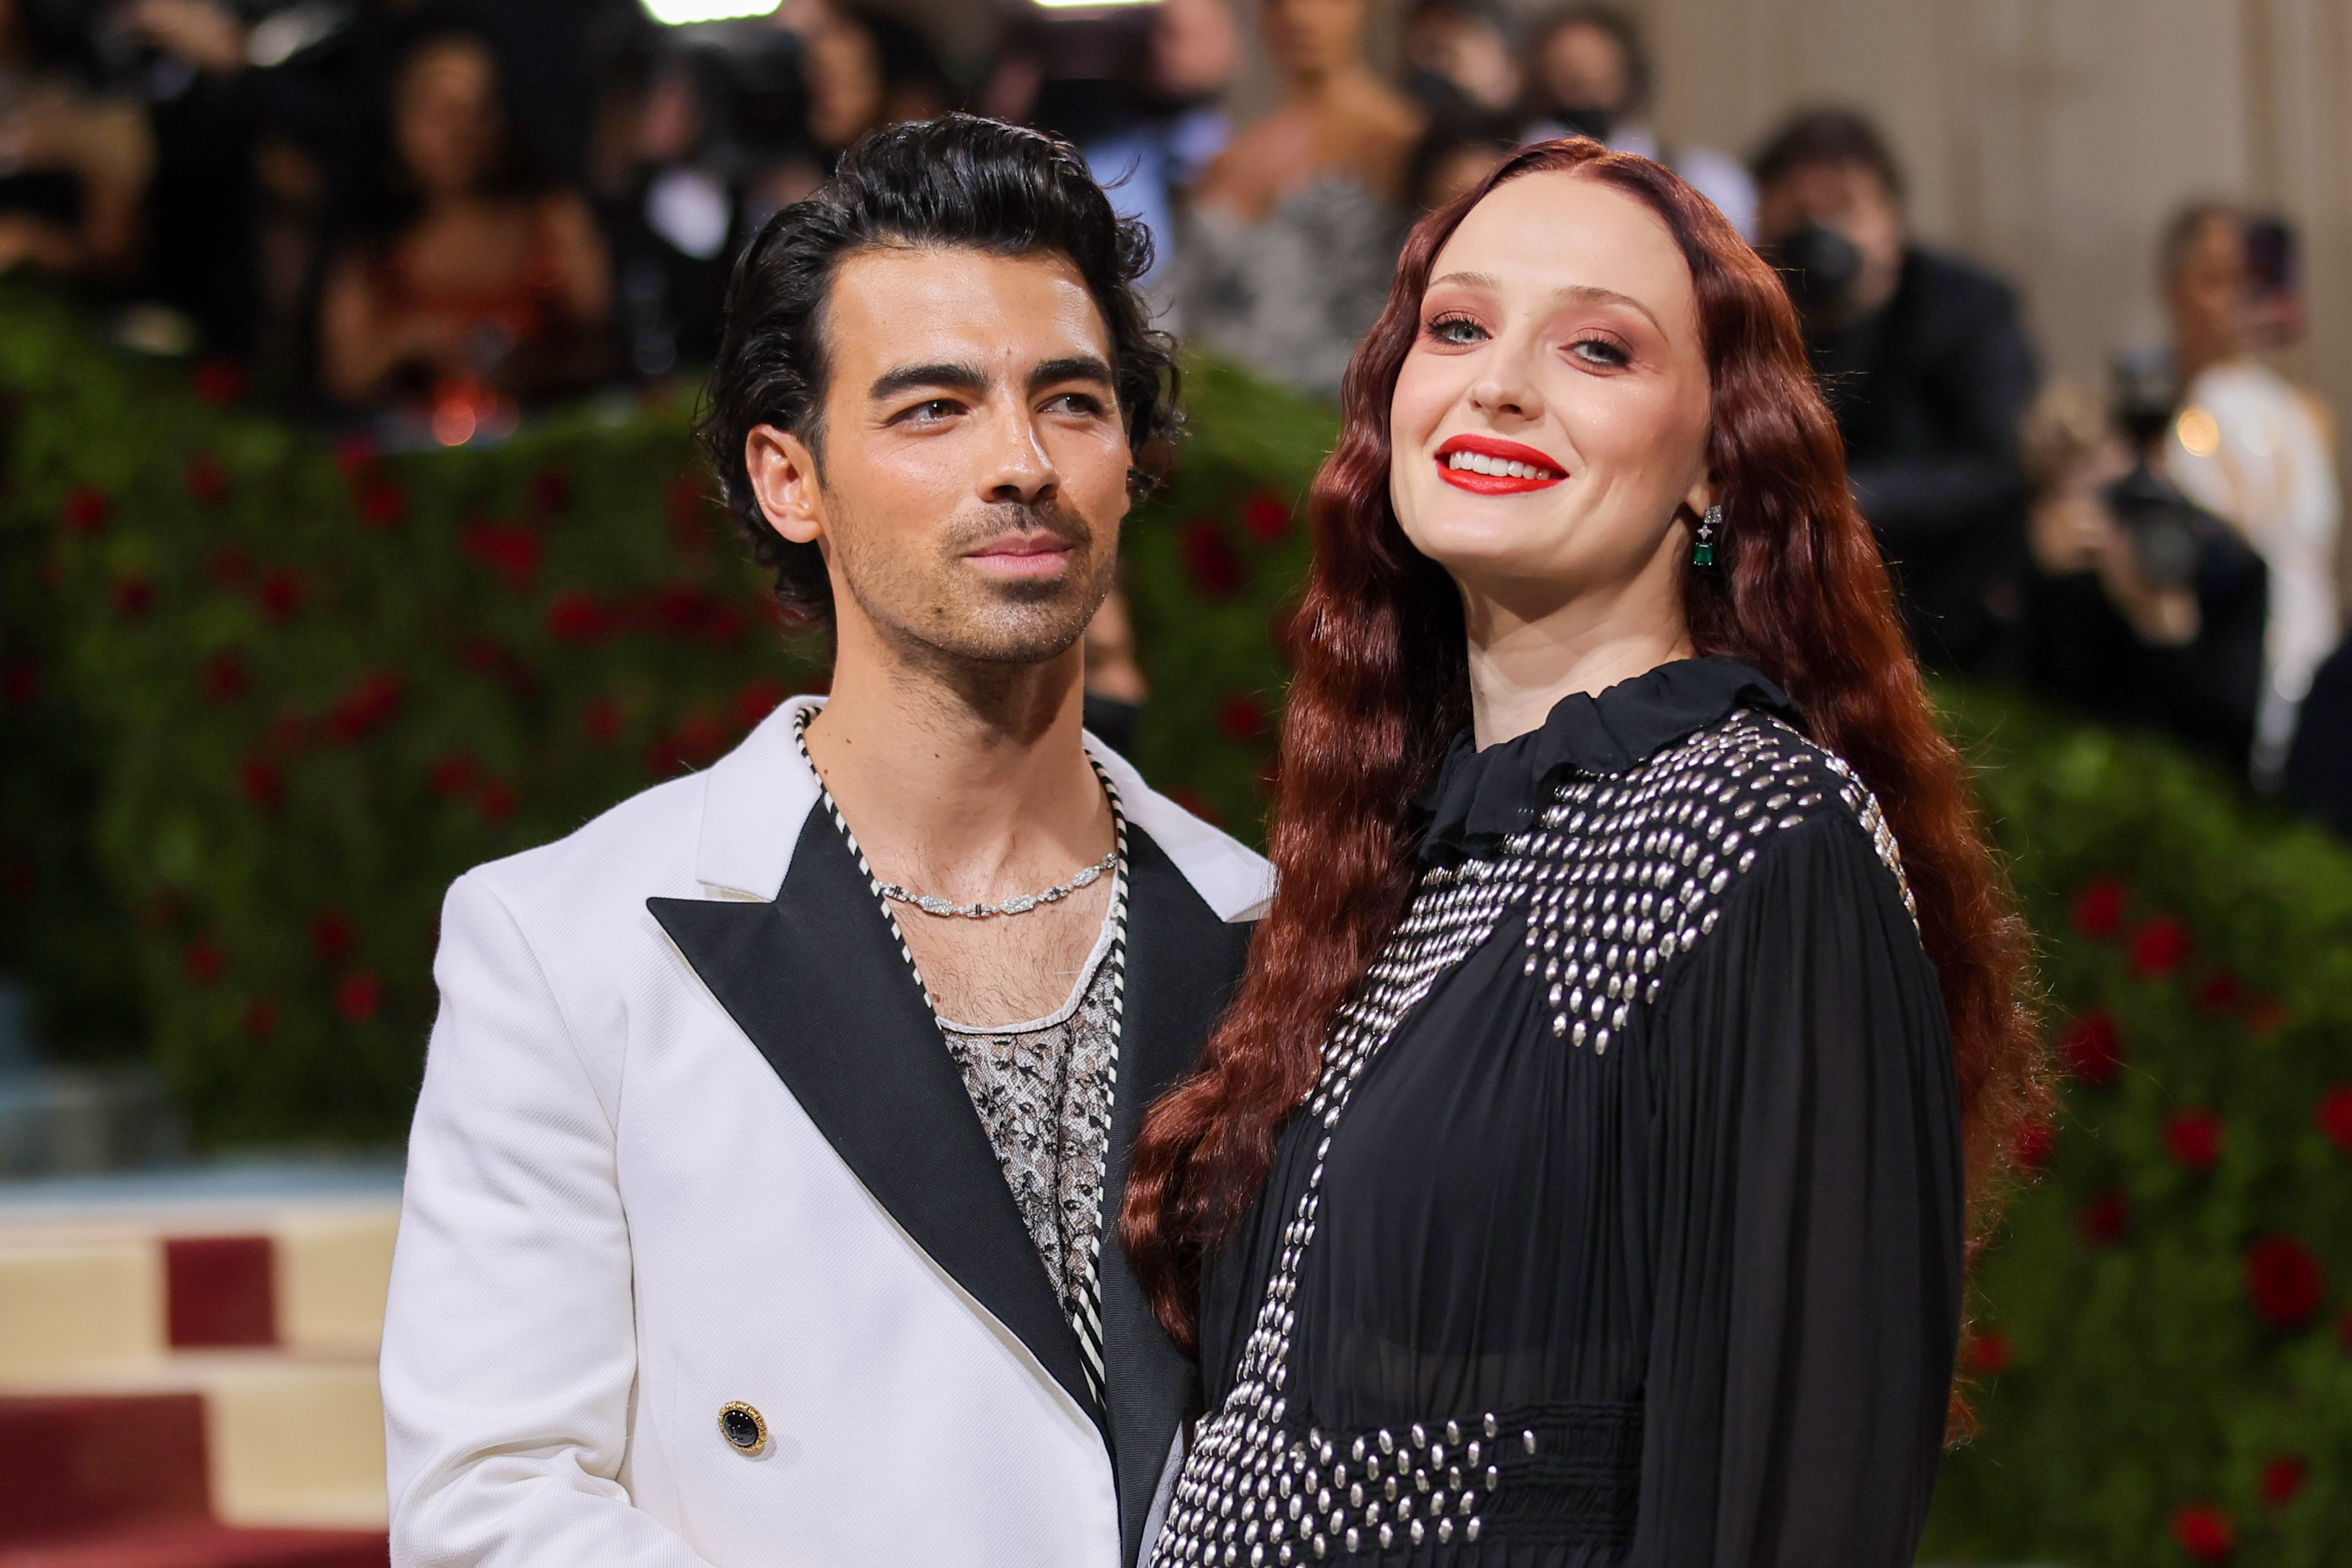 Close-up of Joe and Sophie smiling at a media event